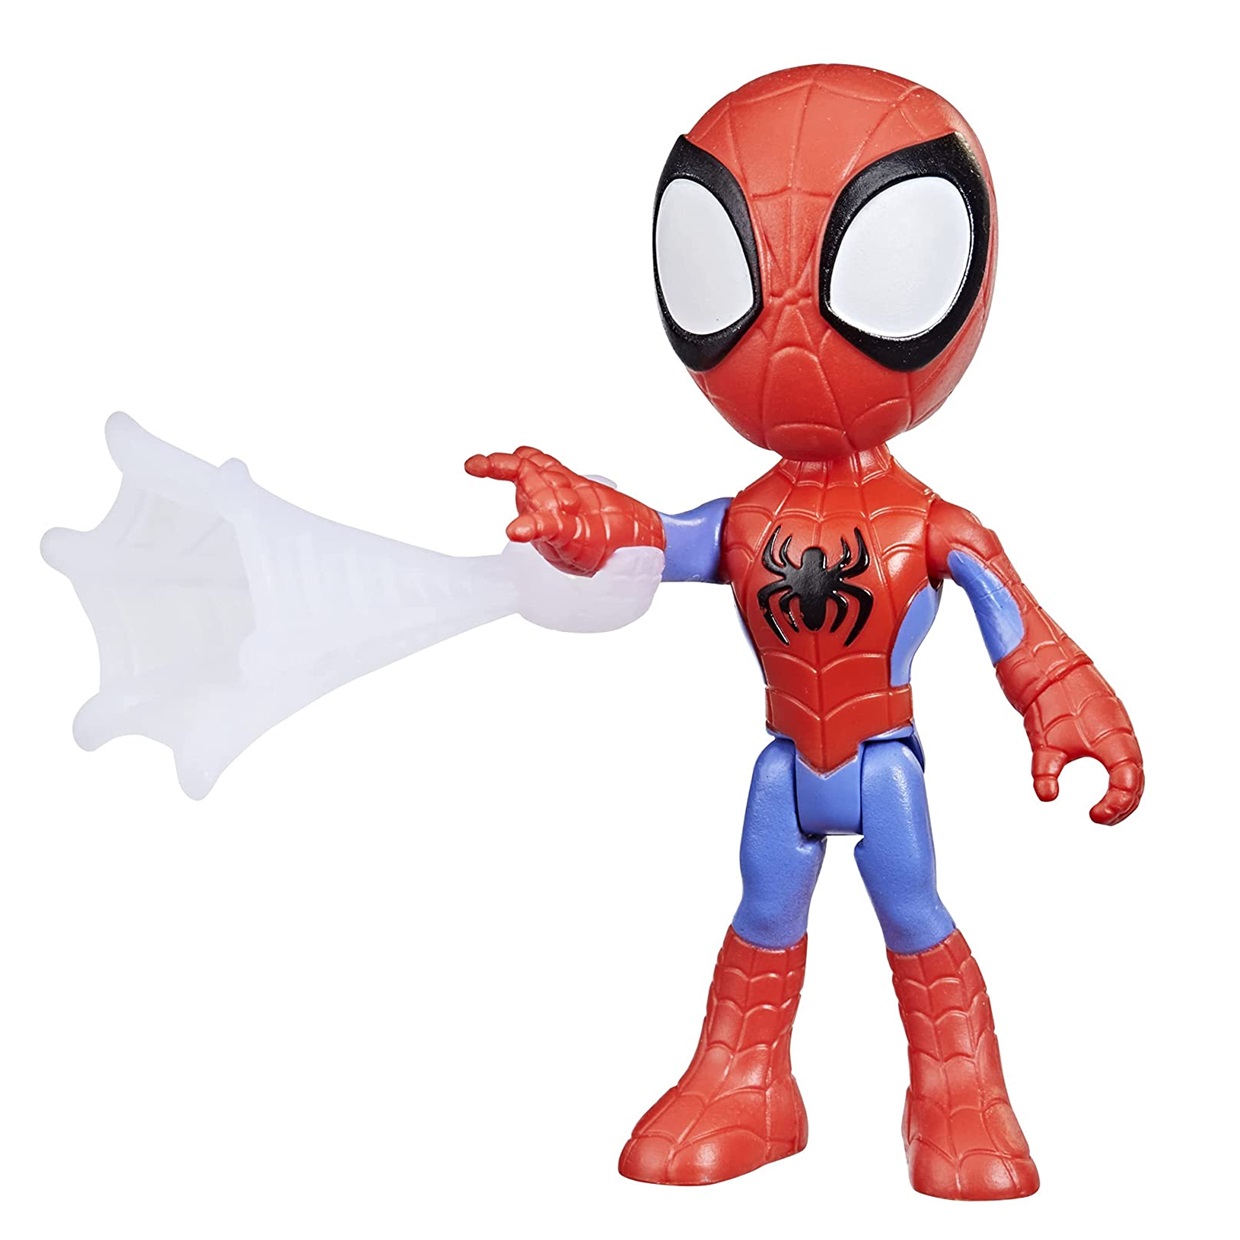 Spidey Figura Spidey And His Amazing Friends 4 PuLG